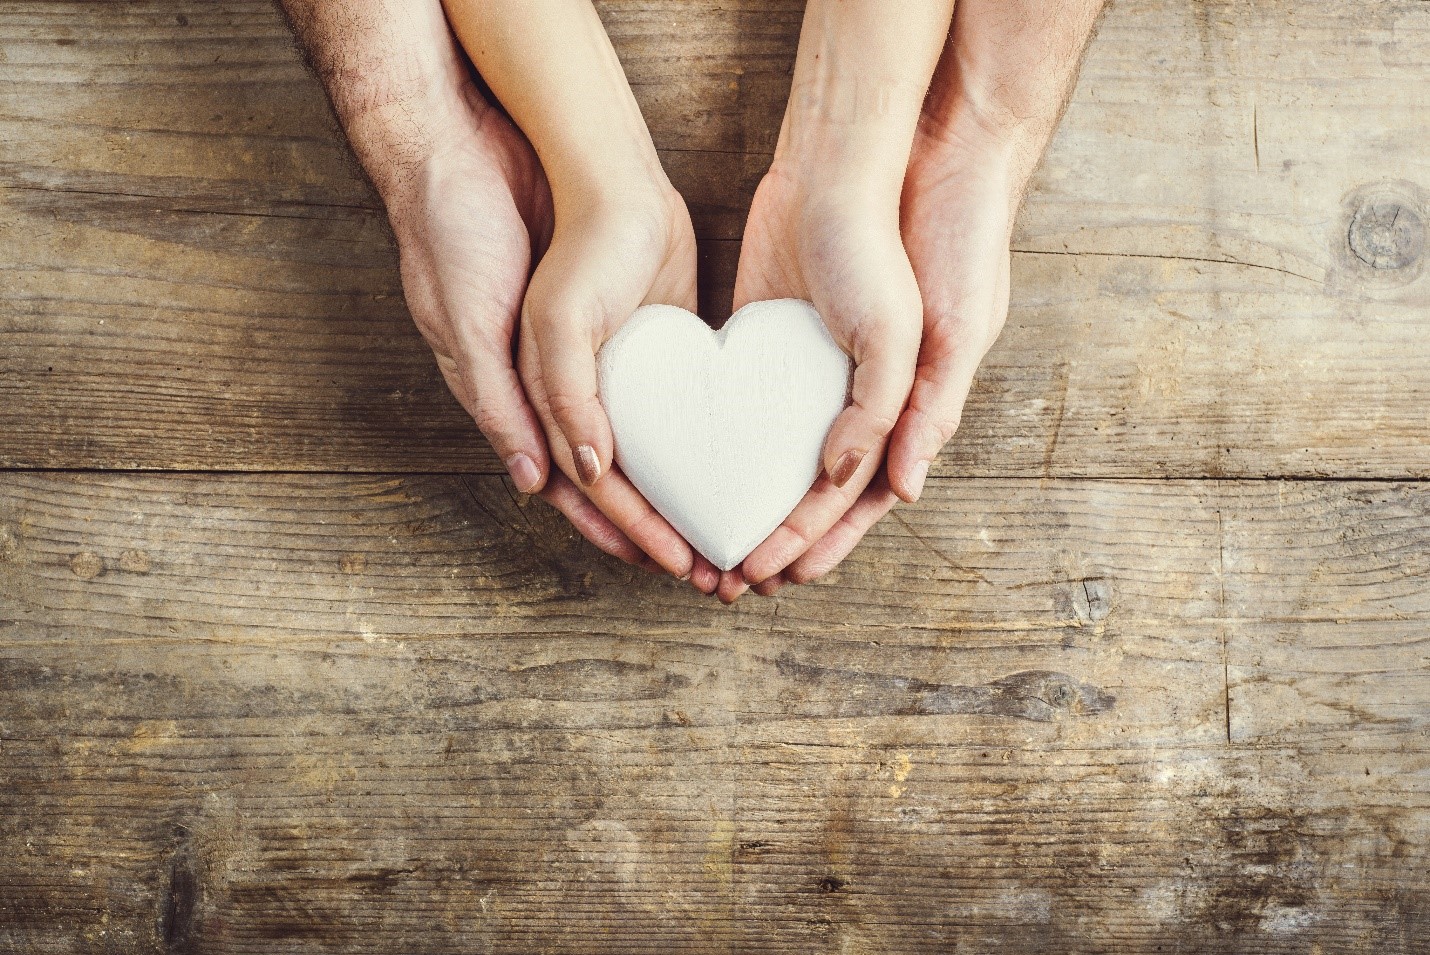 Hands holding heart to promote Kofinas Fertility Group's egg freezing services